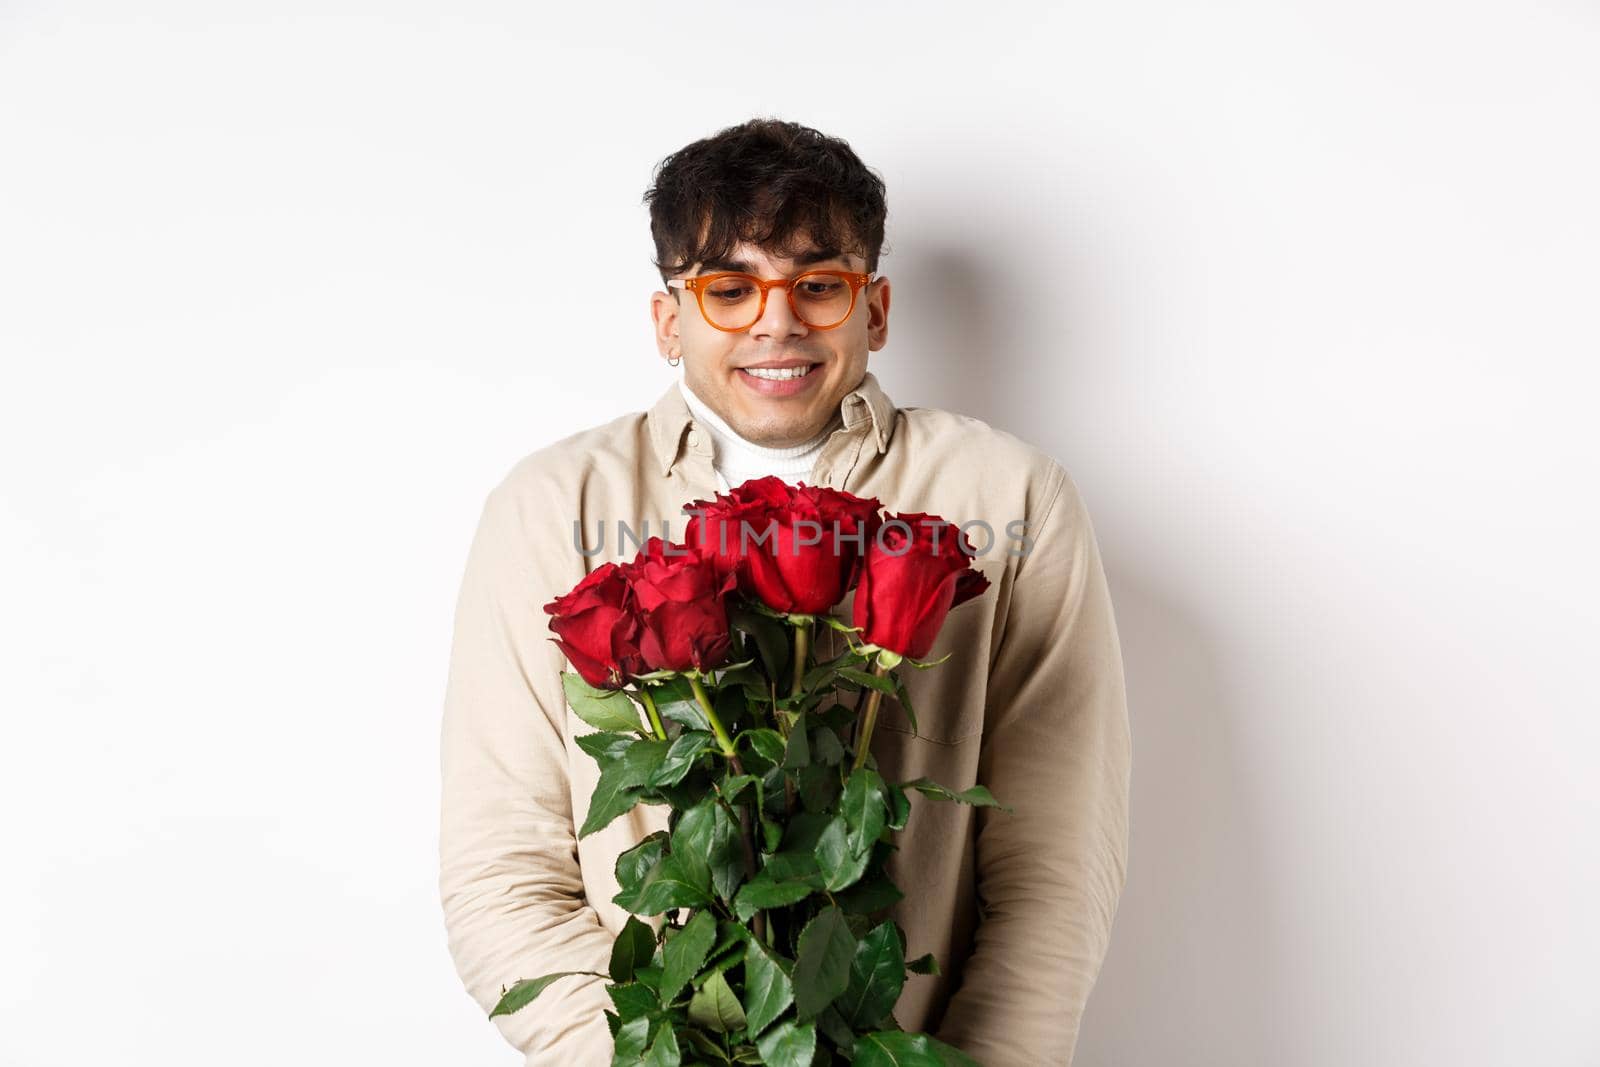 Cheerful gay man receive red roses from boyfriend, looking excited and smiling, having romantic date on Valentines day with lover, standing over white background.